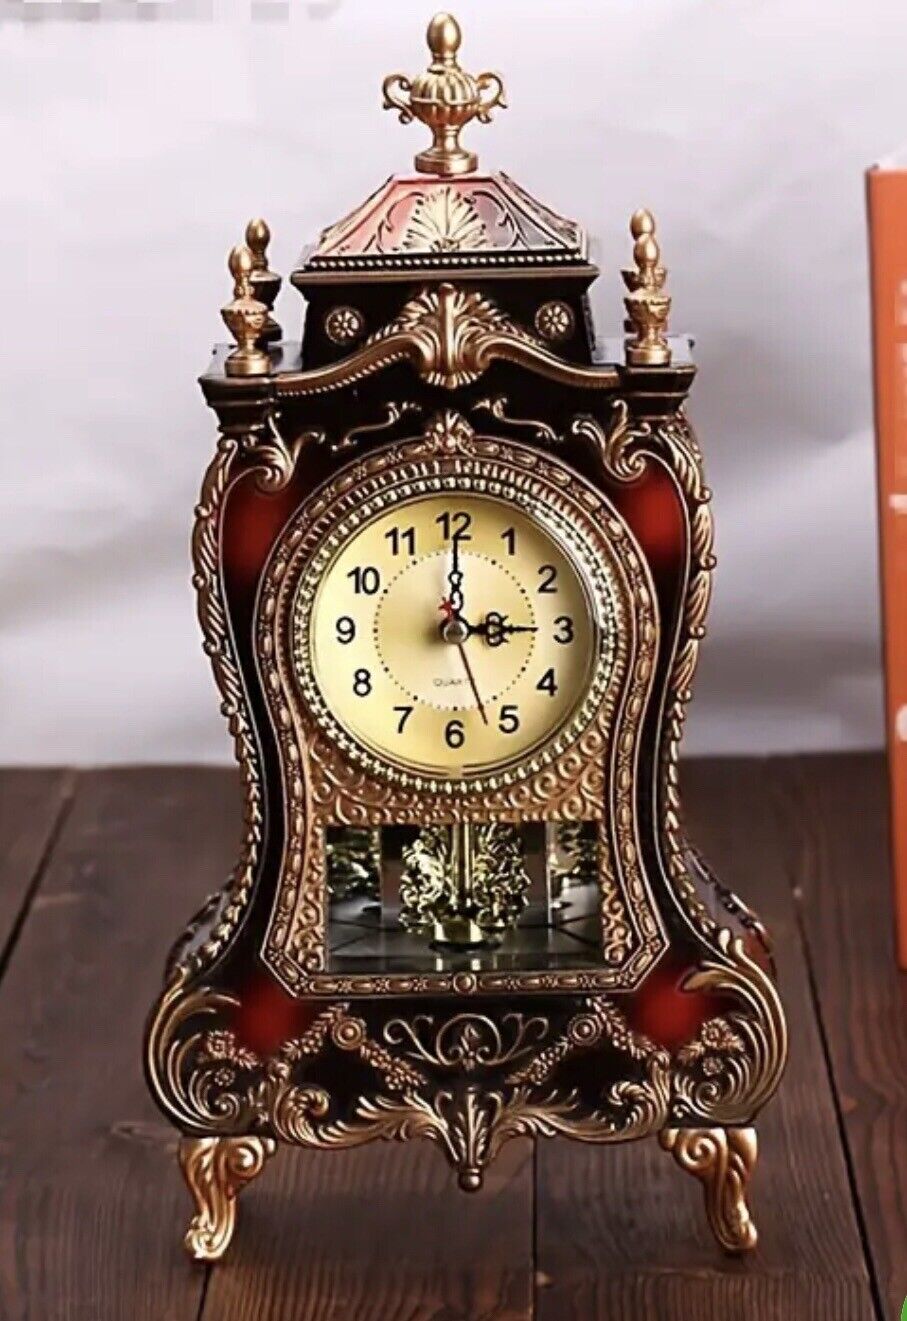 Elegant European-Style Table Clock - Silent Sweep Second Hand, 12 Music Chimes